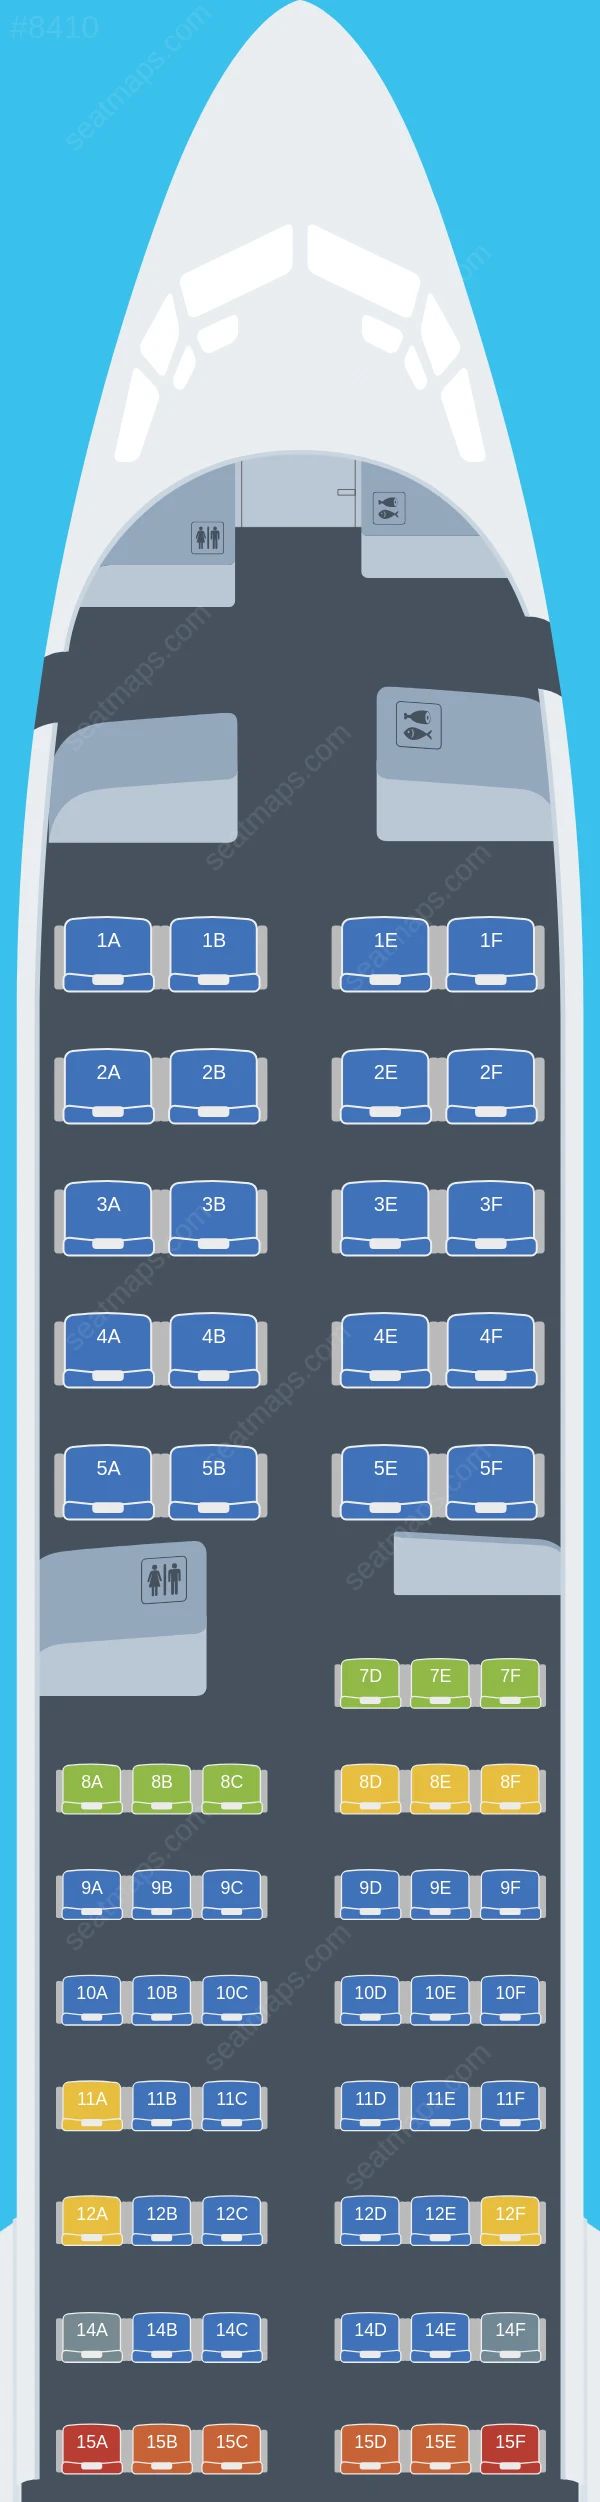 United Boeing 737 MAX 9 seatmap preview